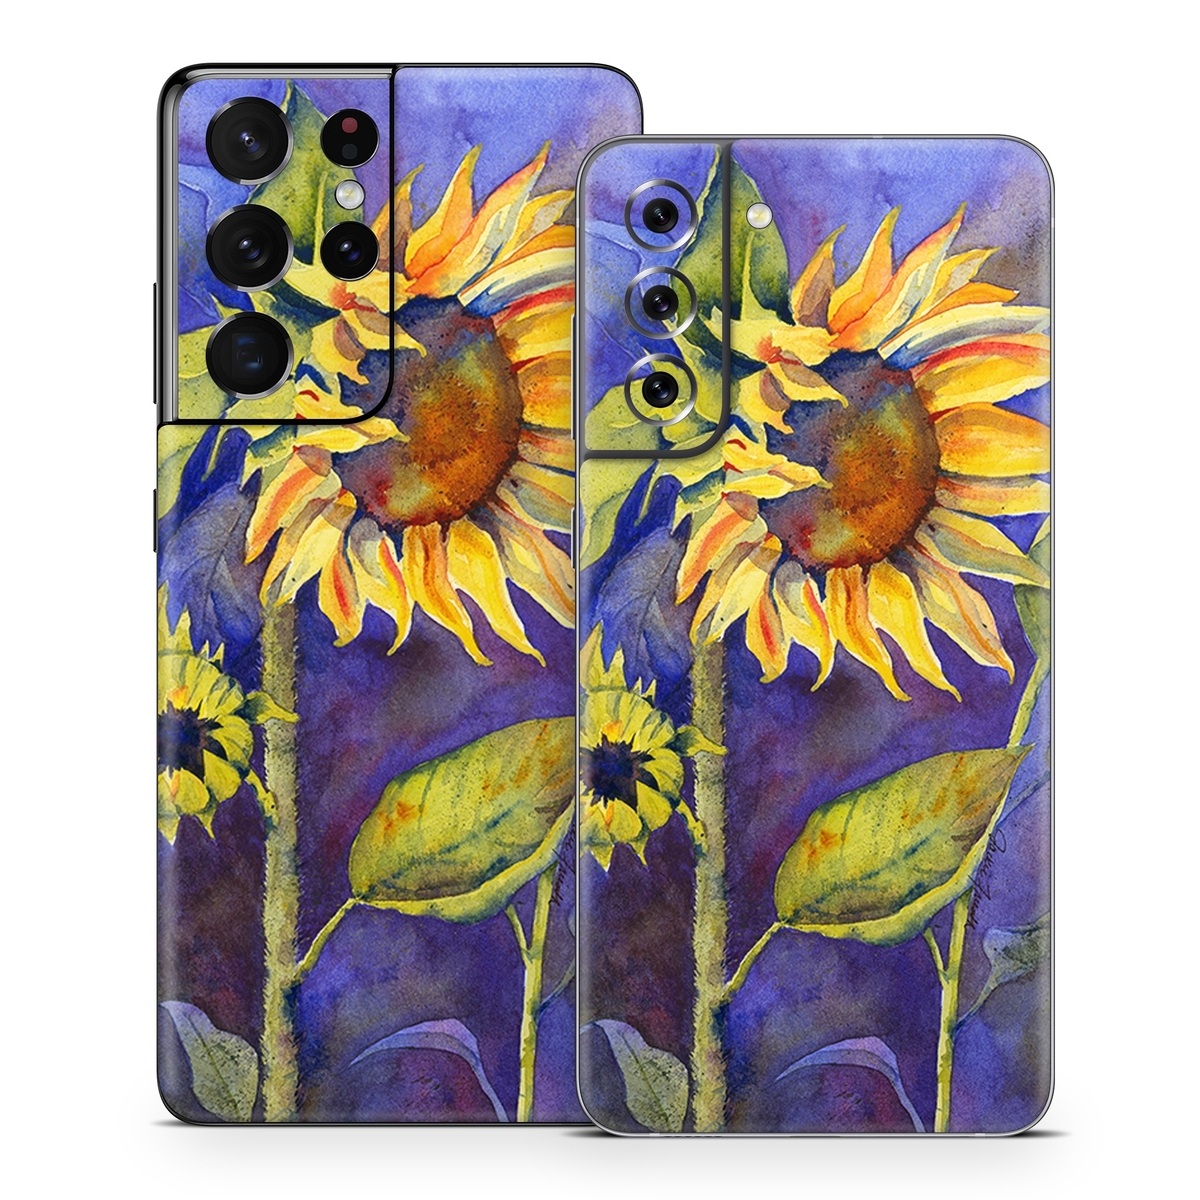  Skin design of Flower, Sunflower, Painting, sunflower, Watercolor paint, Plant, Flowering plant, Yellow, Acrylic paint, Still life, with green, black, blue, gray, red, orange colors